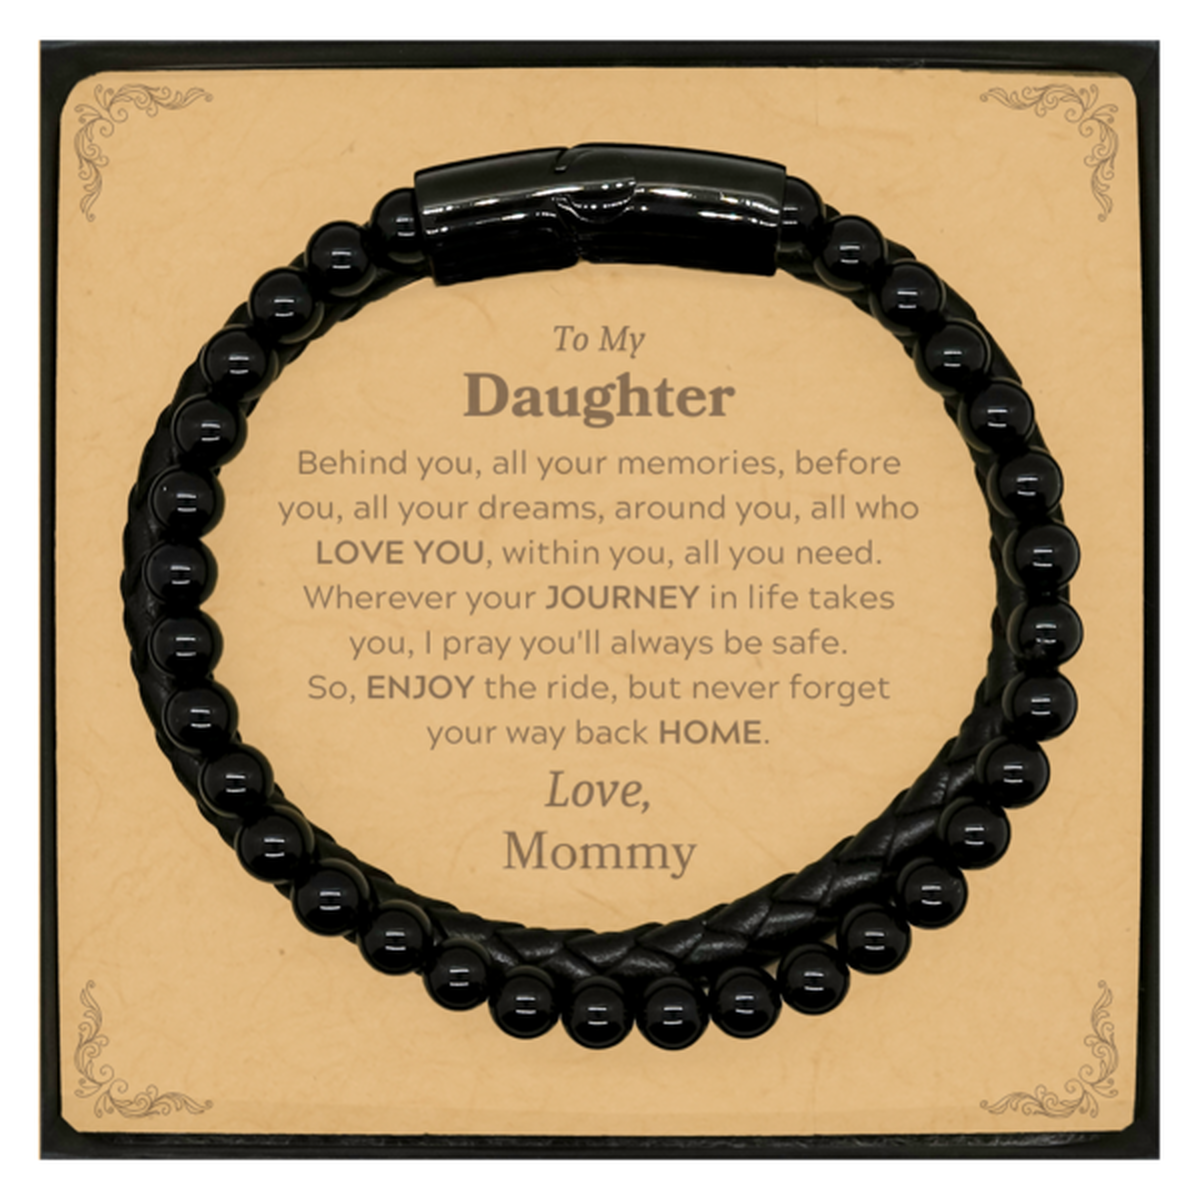 To My Daughter Graduation Gifts from Mommy, Daughter Stone Leather Bracelets Christmas Birthday Gifts for Daughter Behind you, all your memories, before you, all your dreams. Love, Mommy